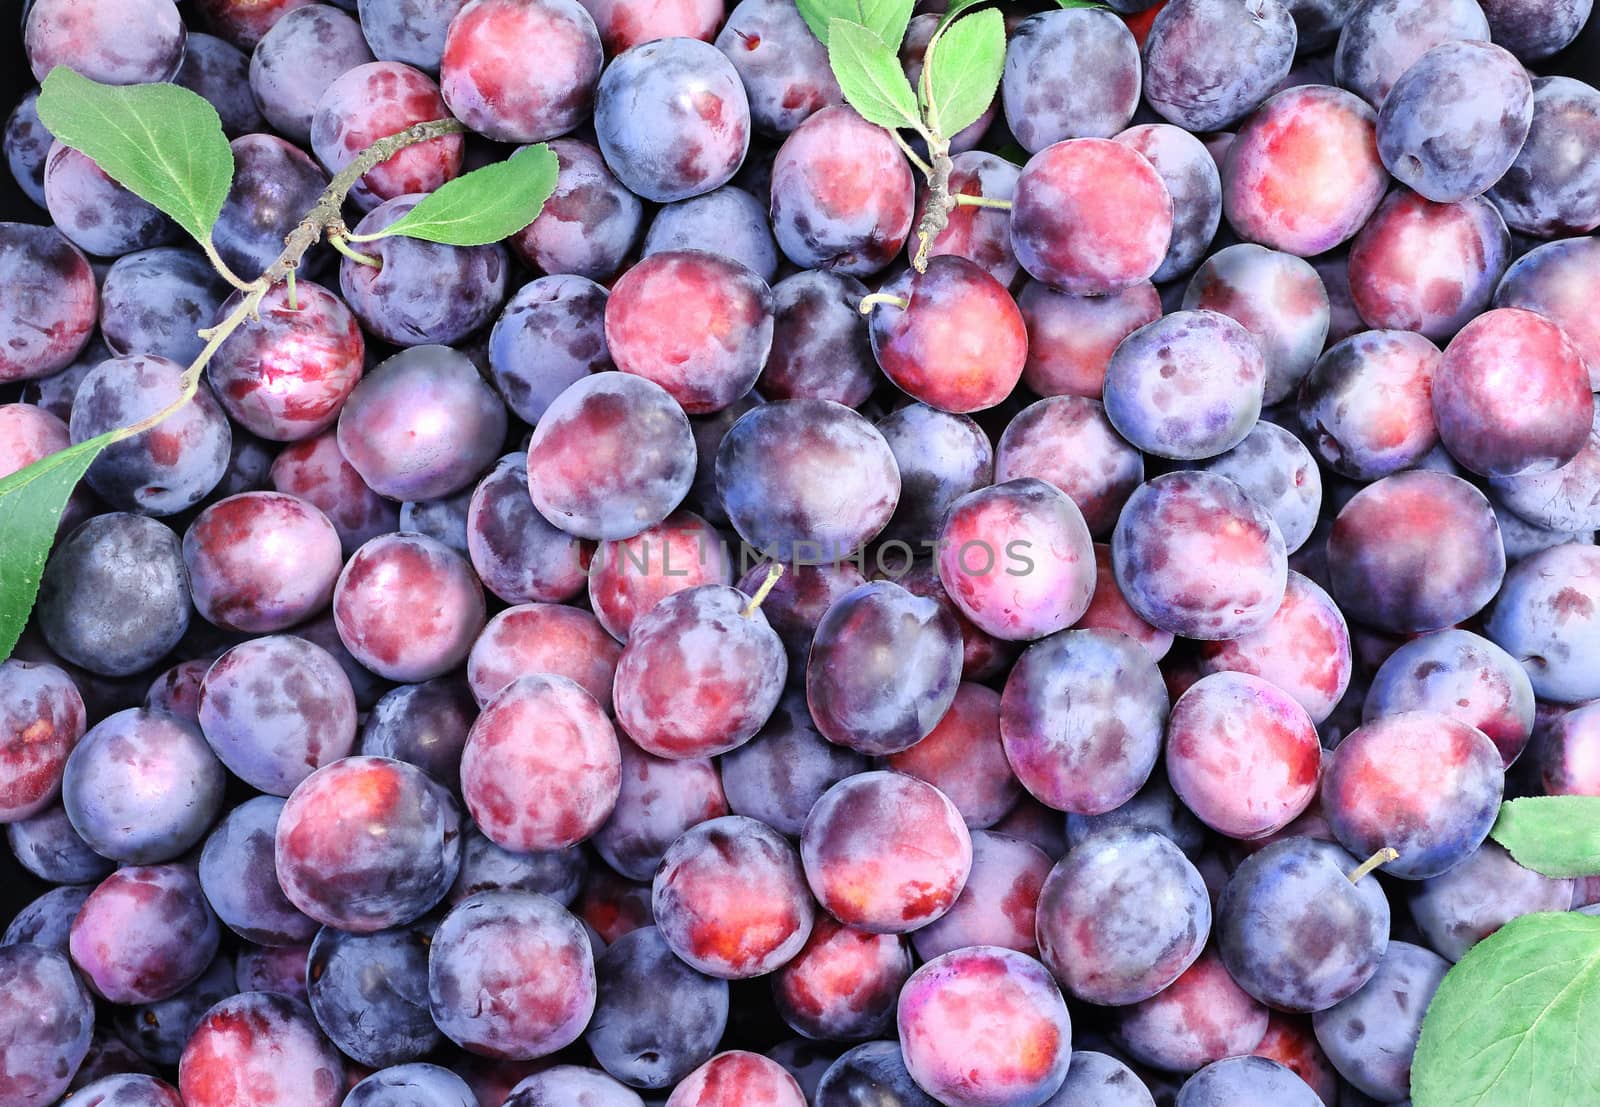 A large number of juicy plums, plucked from the tree.